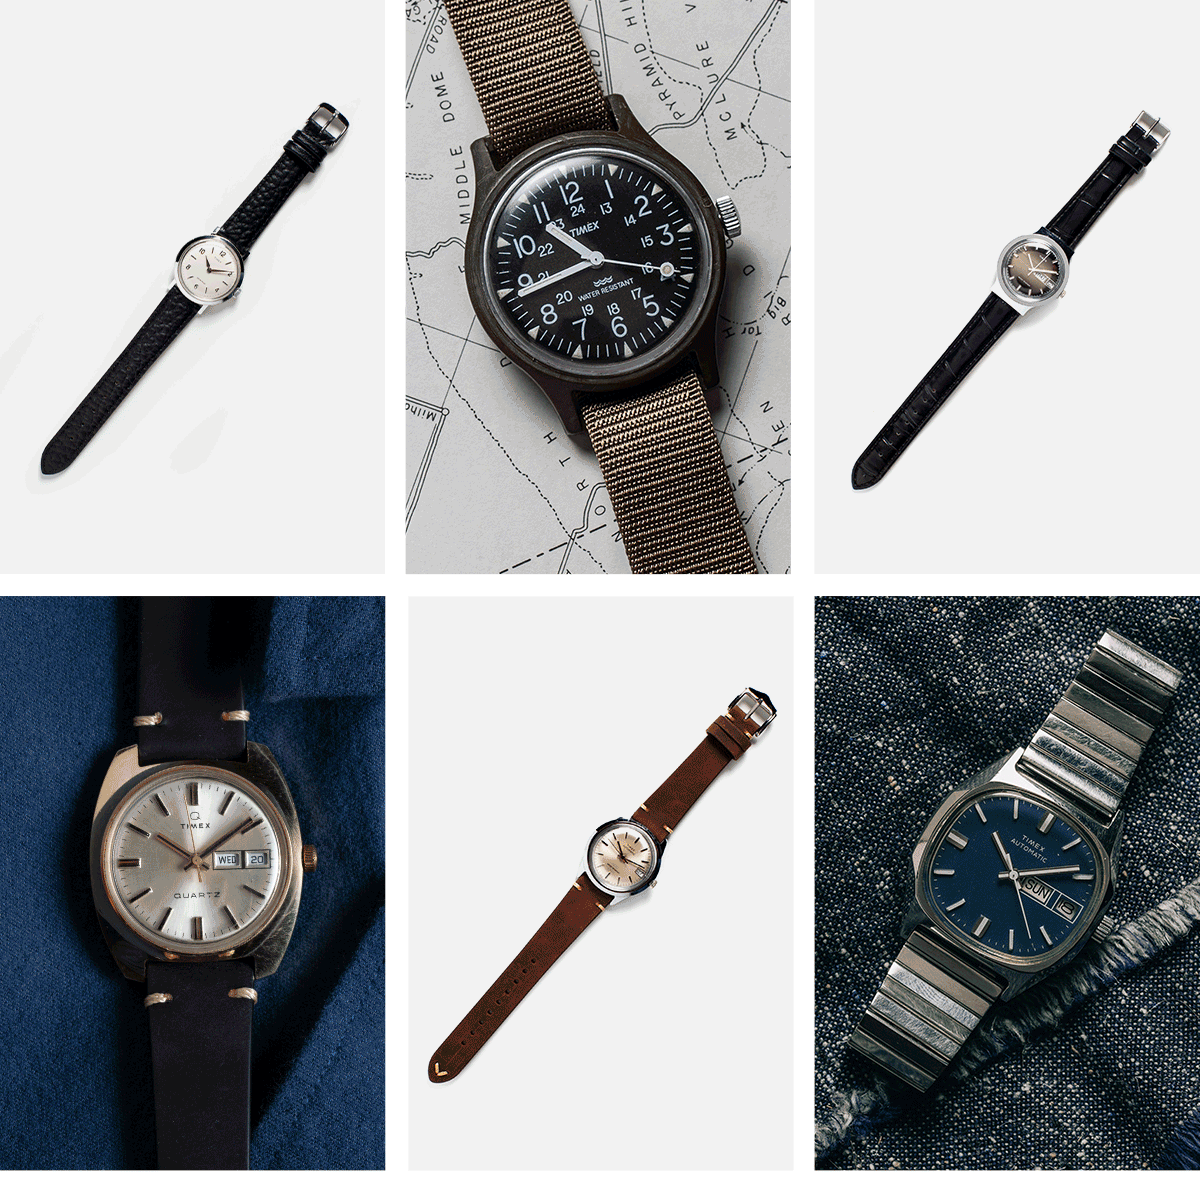 Product Grid of Different Colorways of Watches